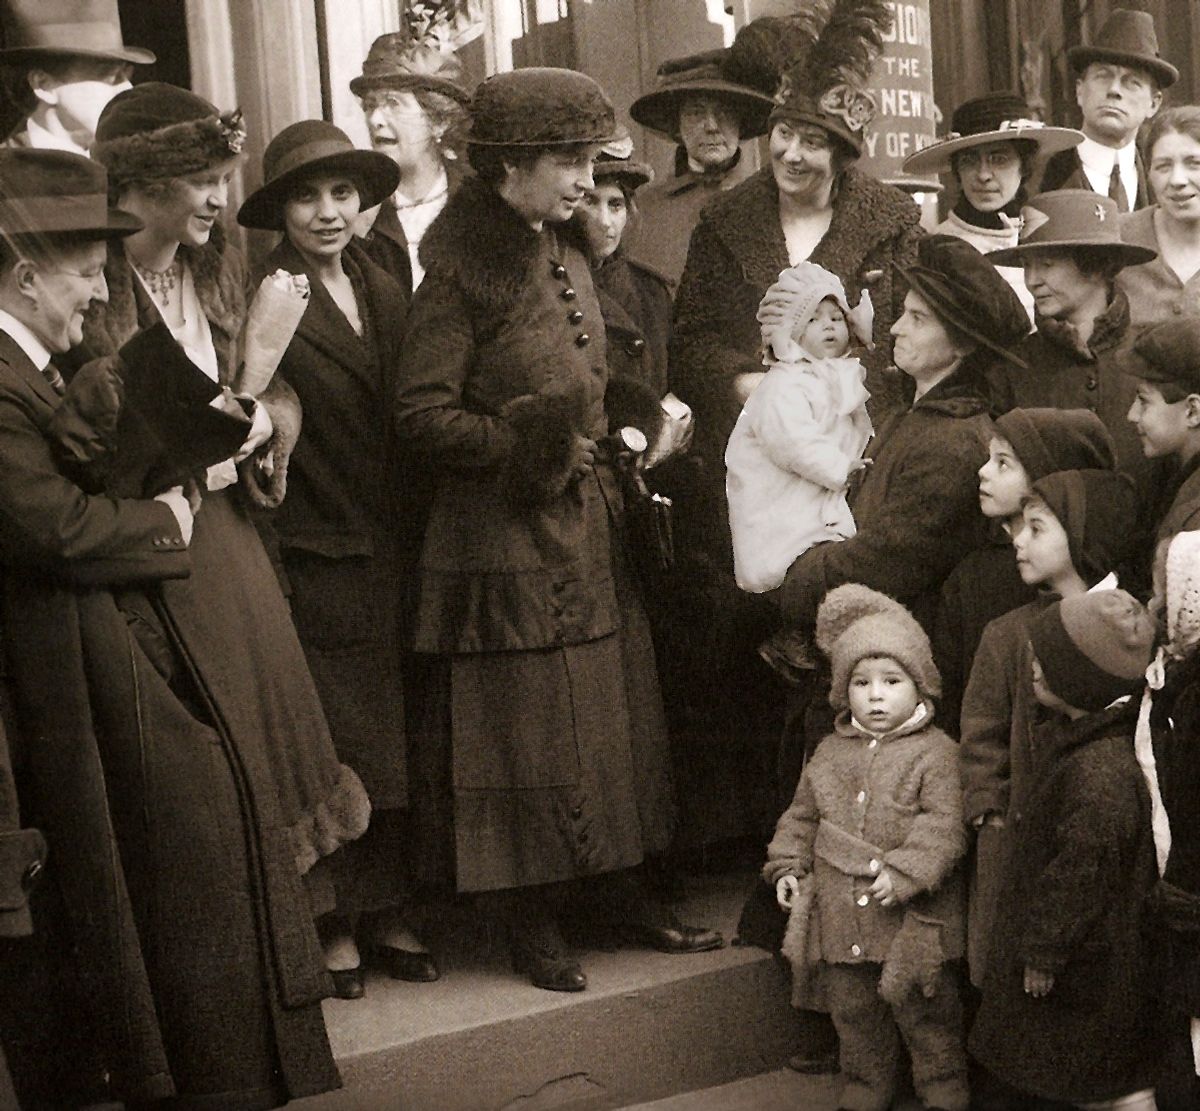 Birth Control Activist And Eugenicist Margaret Sanger Should Not Be Idolized In Historical Curriculums